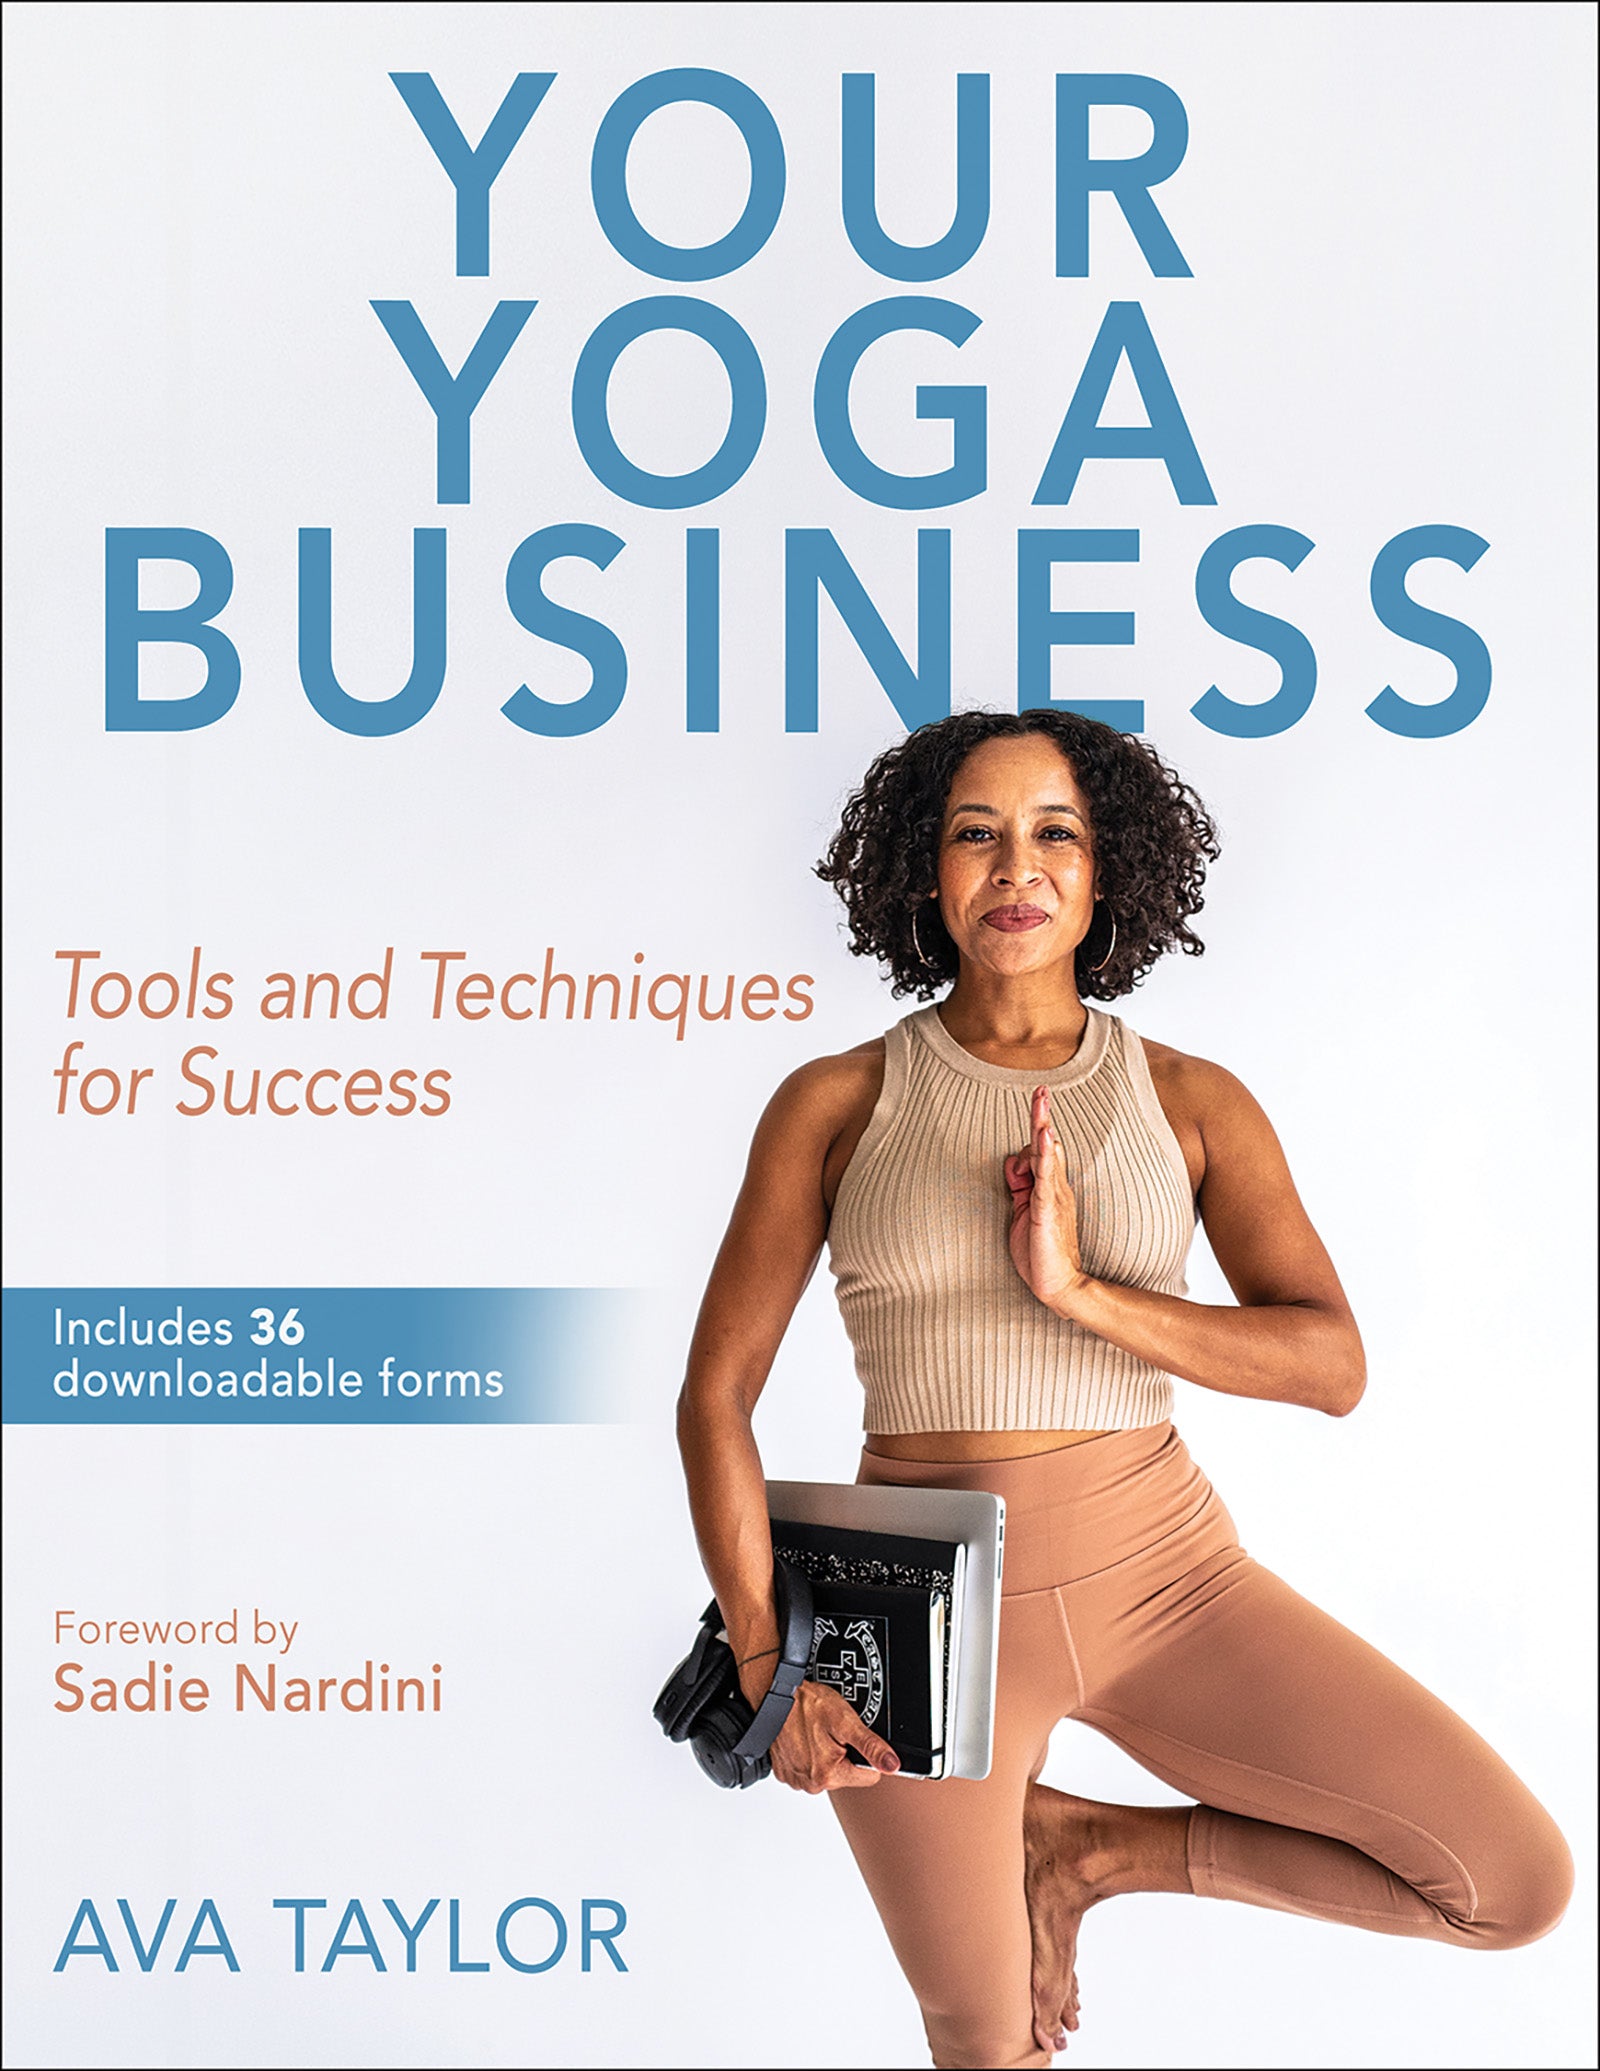 Your Yoga Business 6 Month Retainer - Career Coaching and Council